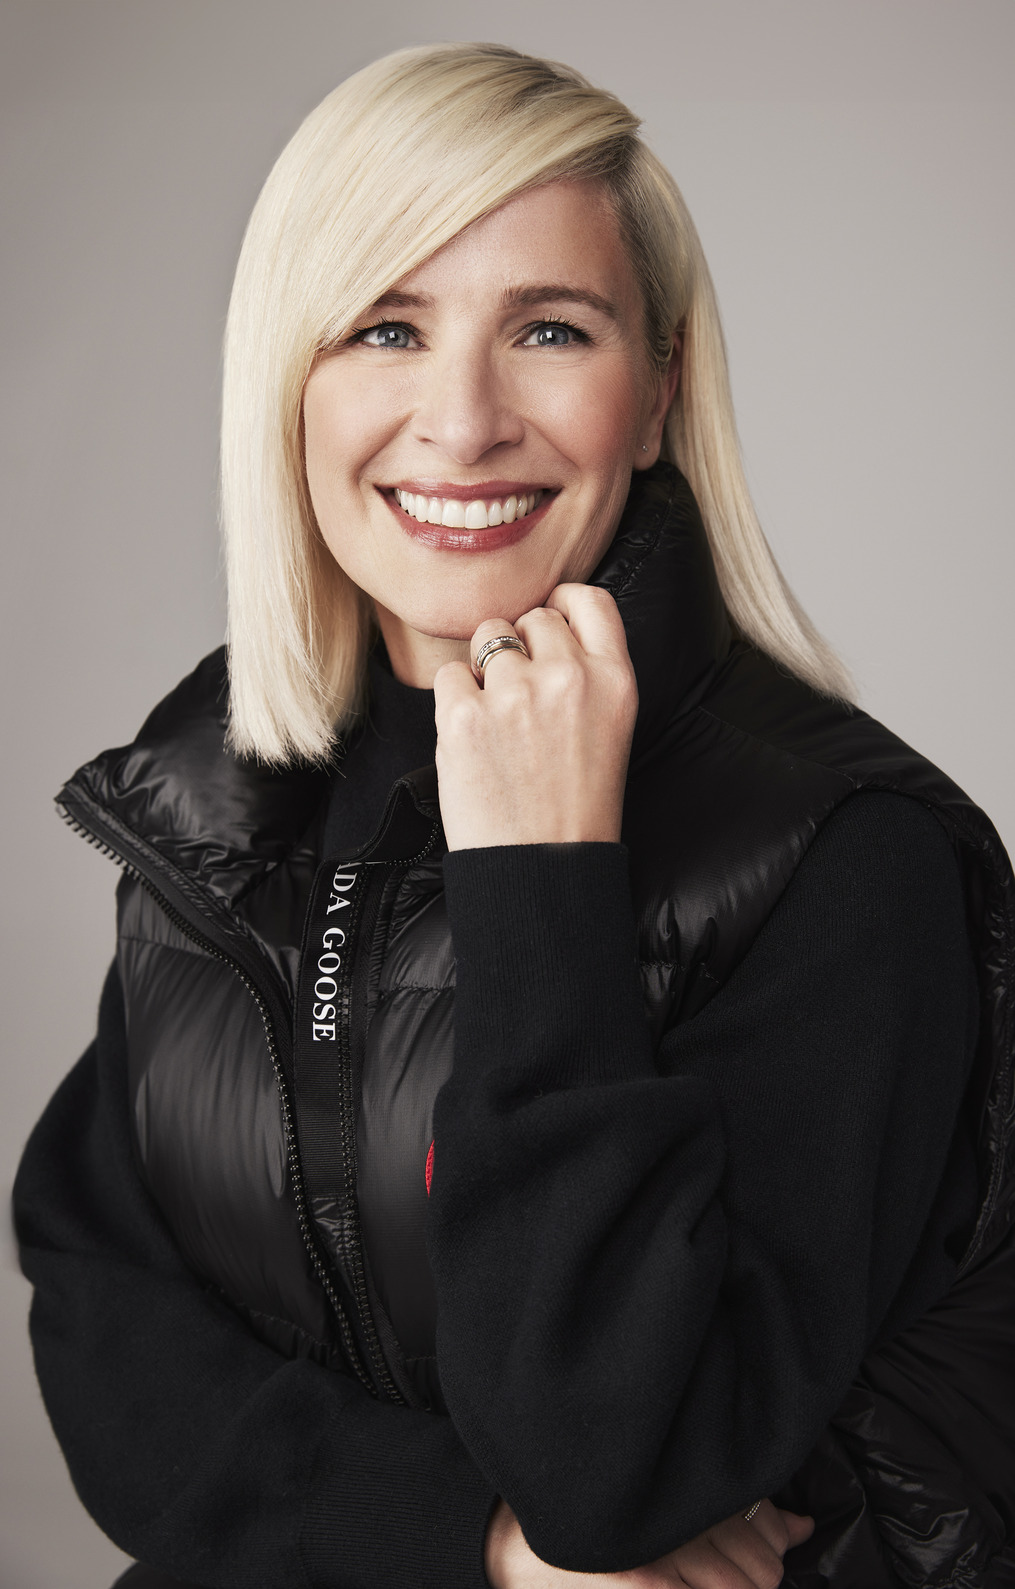 Carrie Baker wearing a black Canada Goose puffer vest and black long-sleeve sweater underneath. She is smiling with blonde hair perched on her hand.